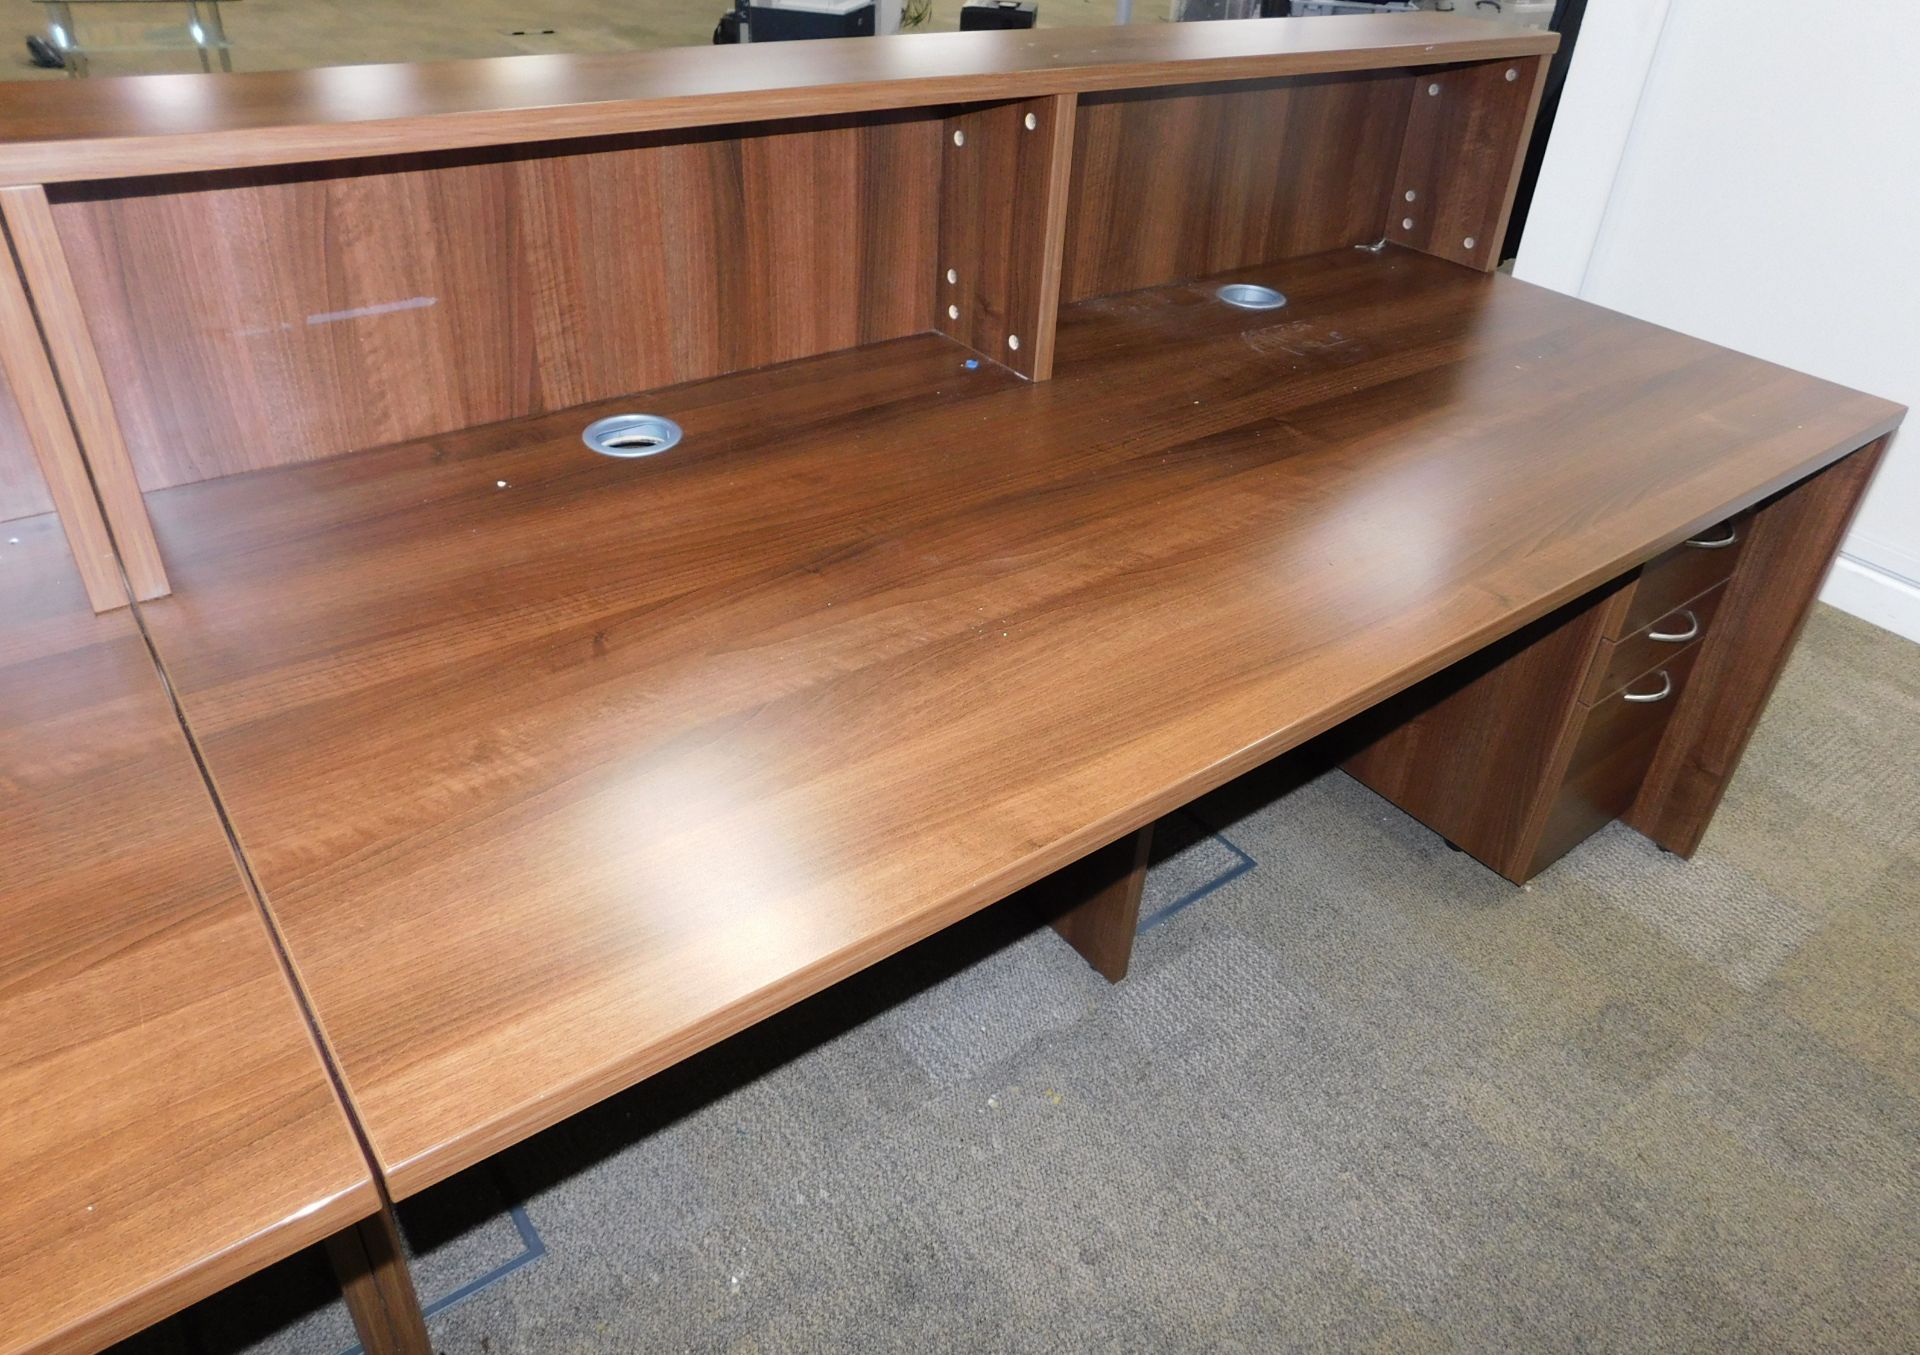 American Walnut Effect Reception Unit 180cm x 80cm, with Two Matching 3-Drawer Pedestals (Located - Image 2 of 2